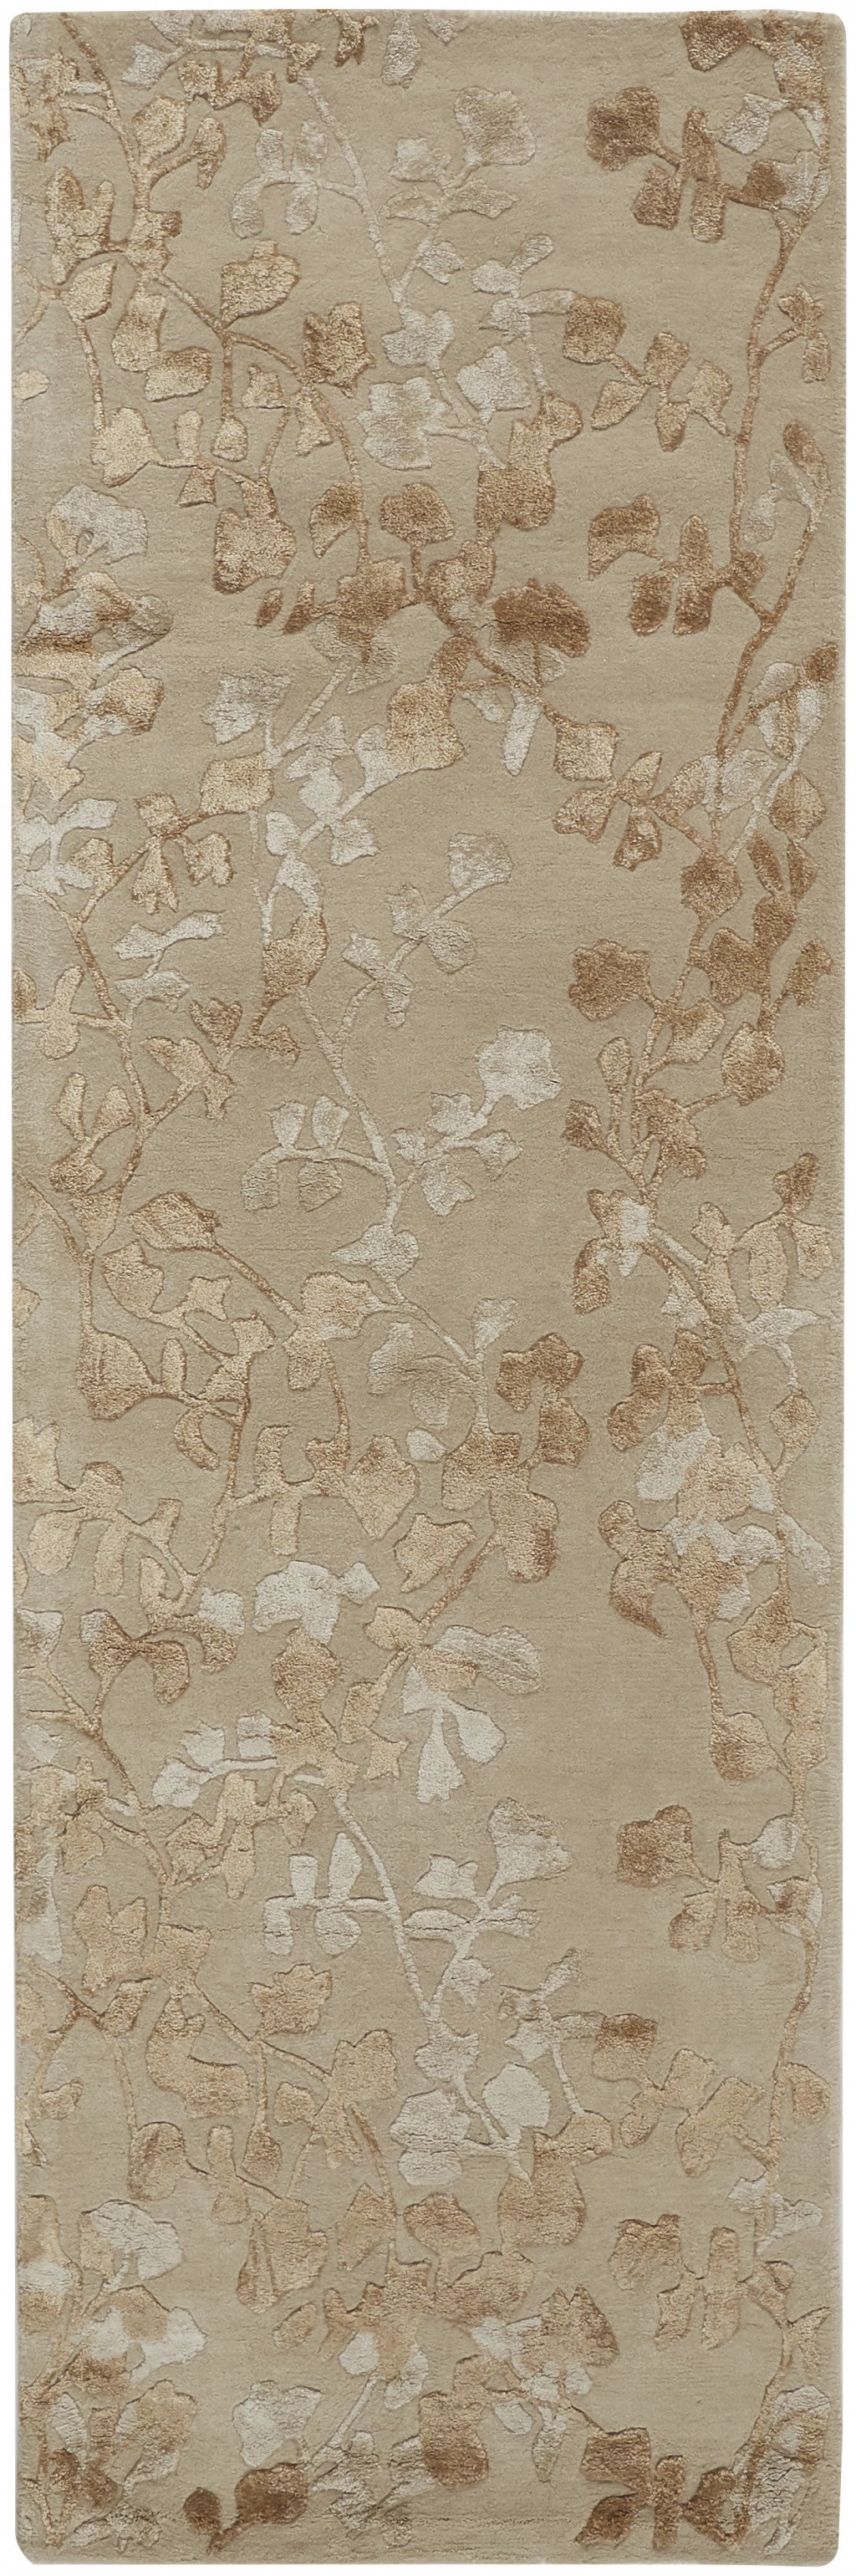 9' X 12' Ivory Tan And Gold Wool Floral Tufted Handmade Area Rug